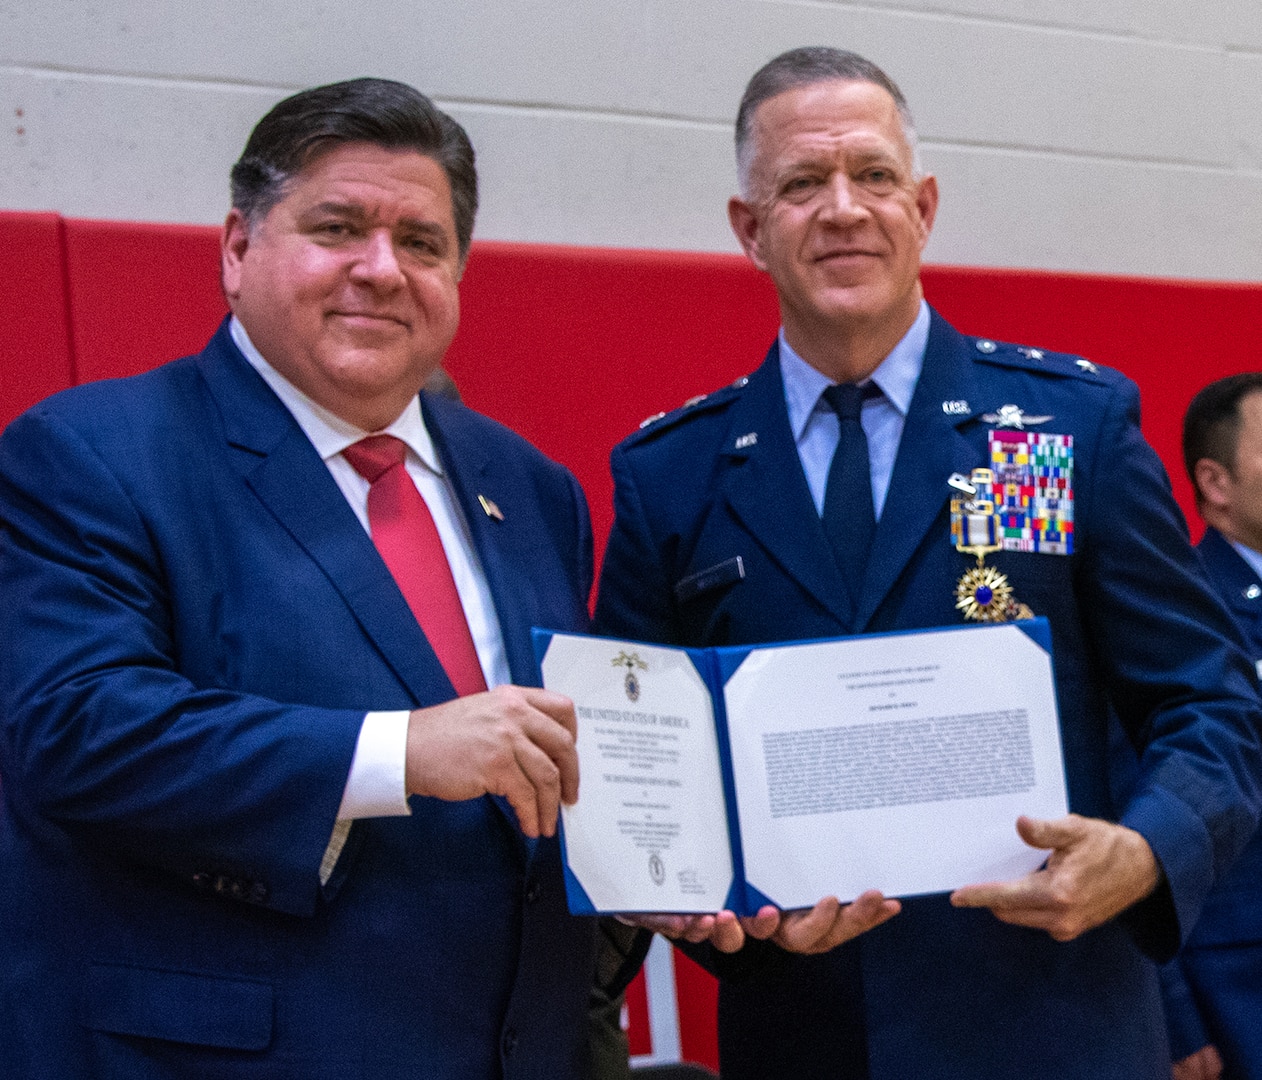 Governor JB Pritzker presents Maj. Gen. Rich Neely, the 40th Adjutant General of Illinois, with the Distinguished Service Medal during a retirement ceremony immediately following the change of command May 4 at Glenwood High School in Chatham, Illinois. Neely relinquished command of the Illinois National Guard to Maj. Gen. Rodney Boyd and retired after 40 years of military service.